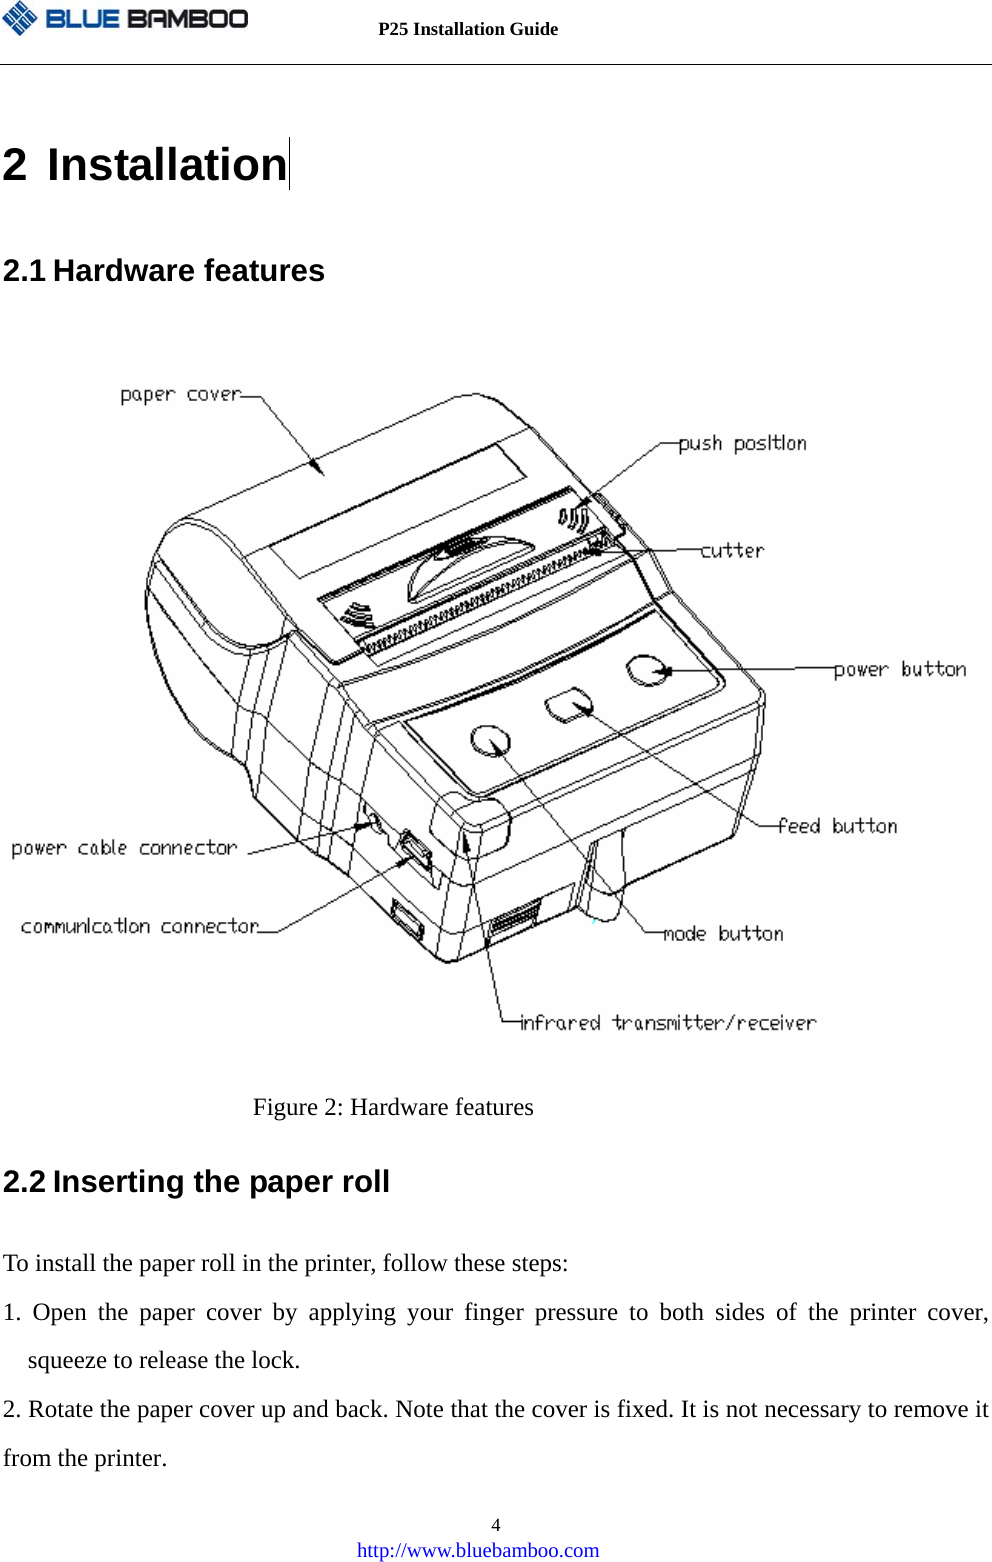          P25 Installation Guide   http://www.bluebamboo.com 42 Installation  2.1 Hardware features  Figure 2: Hardware features 2.2 Inserting the paper roll To install the paper roll in the printer, follow these steps: 1. Open the paper cover by applying your finger pressure to both sides of the printer cover, squeeze to release the lock. 2. Rotate the paper cover up and back. Note that the cover is fixed. It is not necessary to remove it from the printer. 